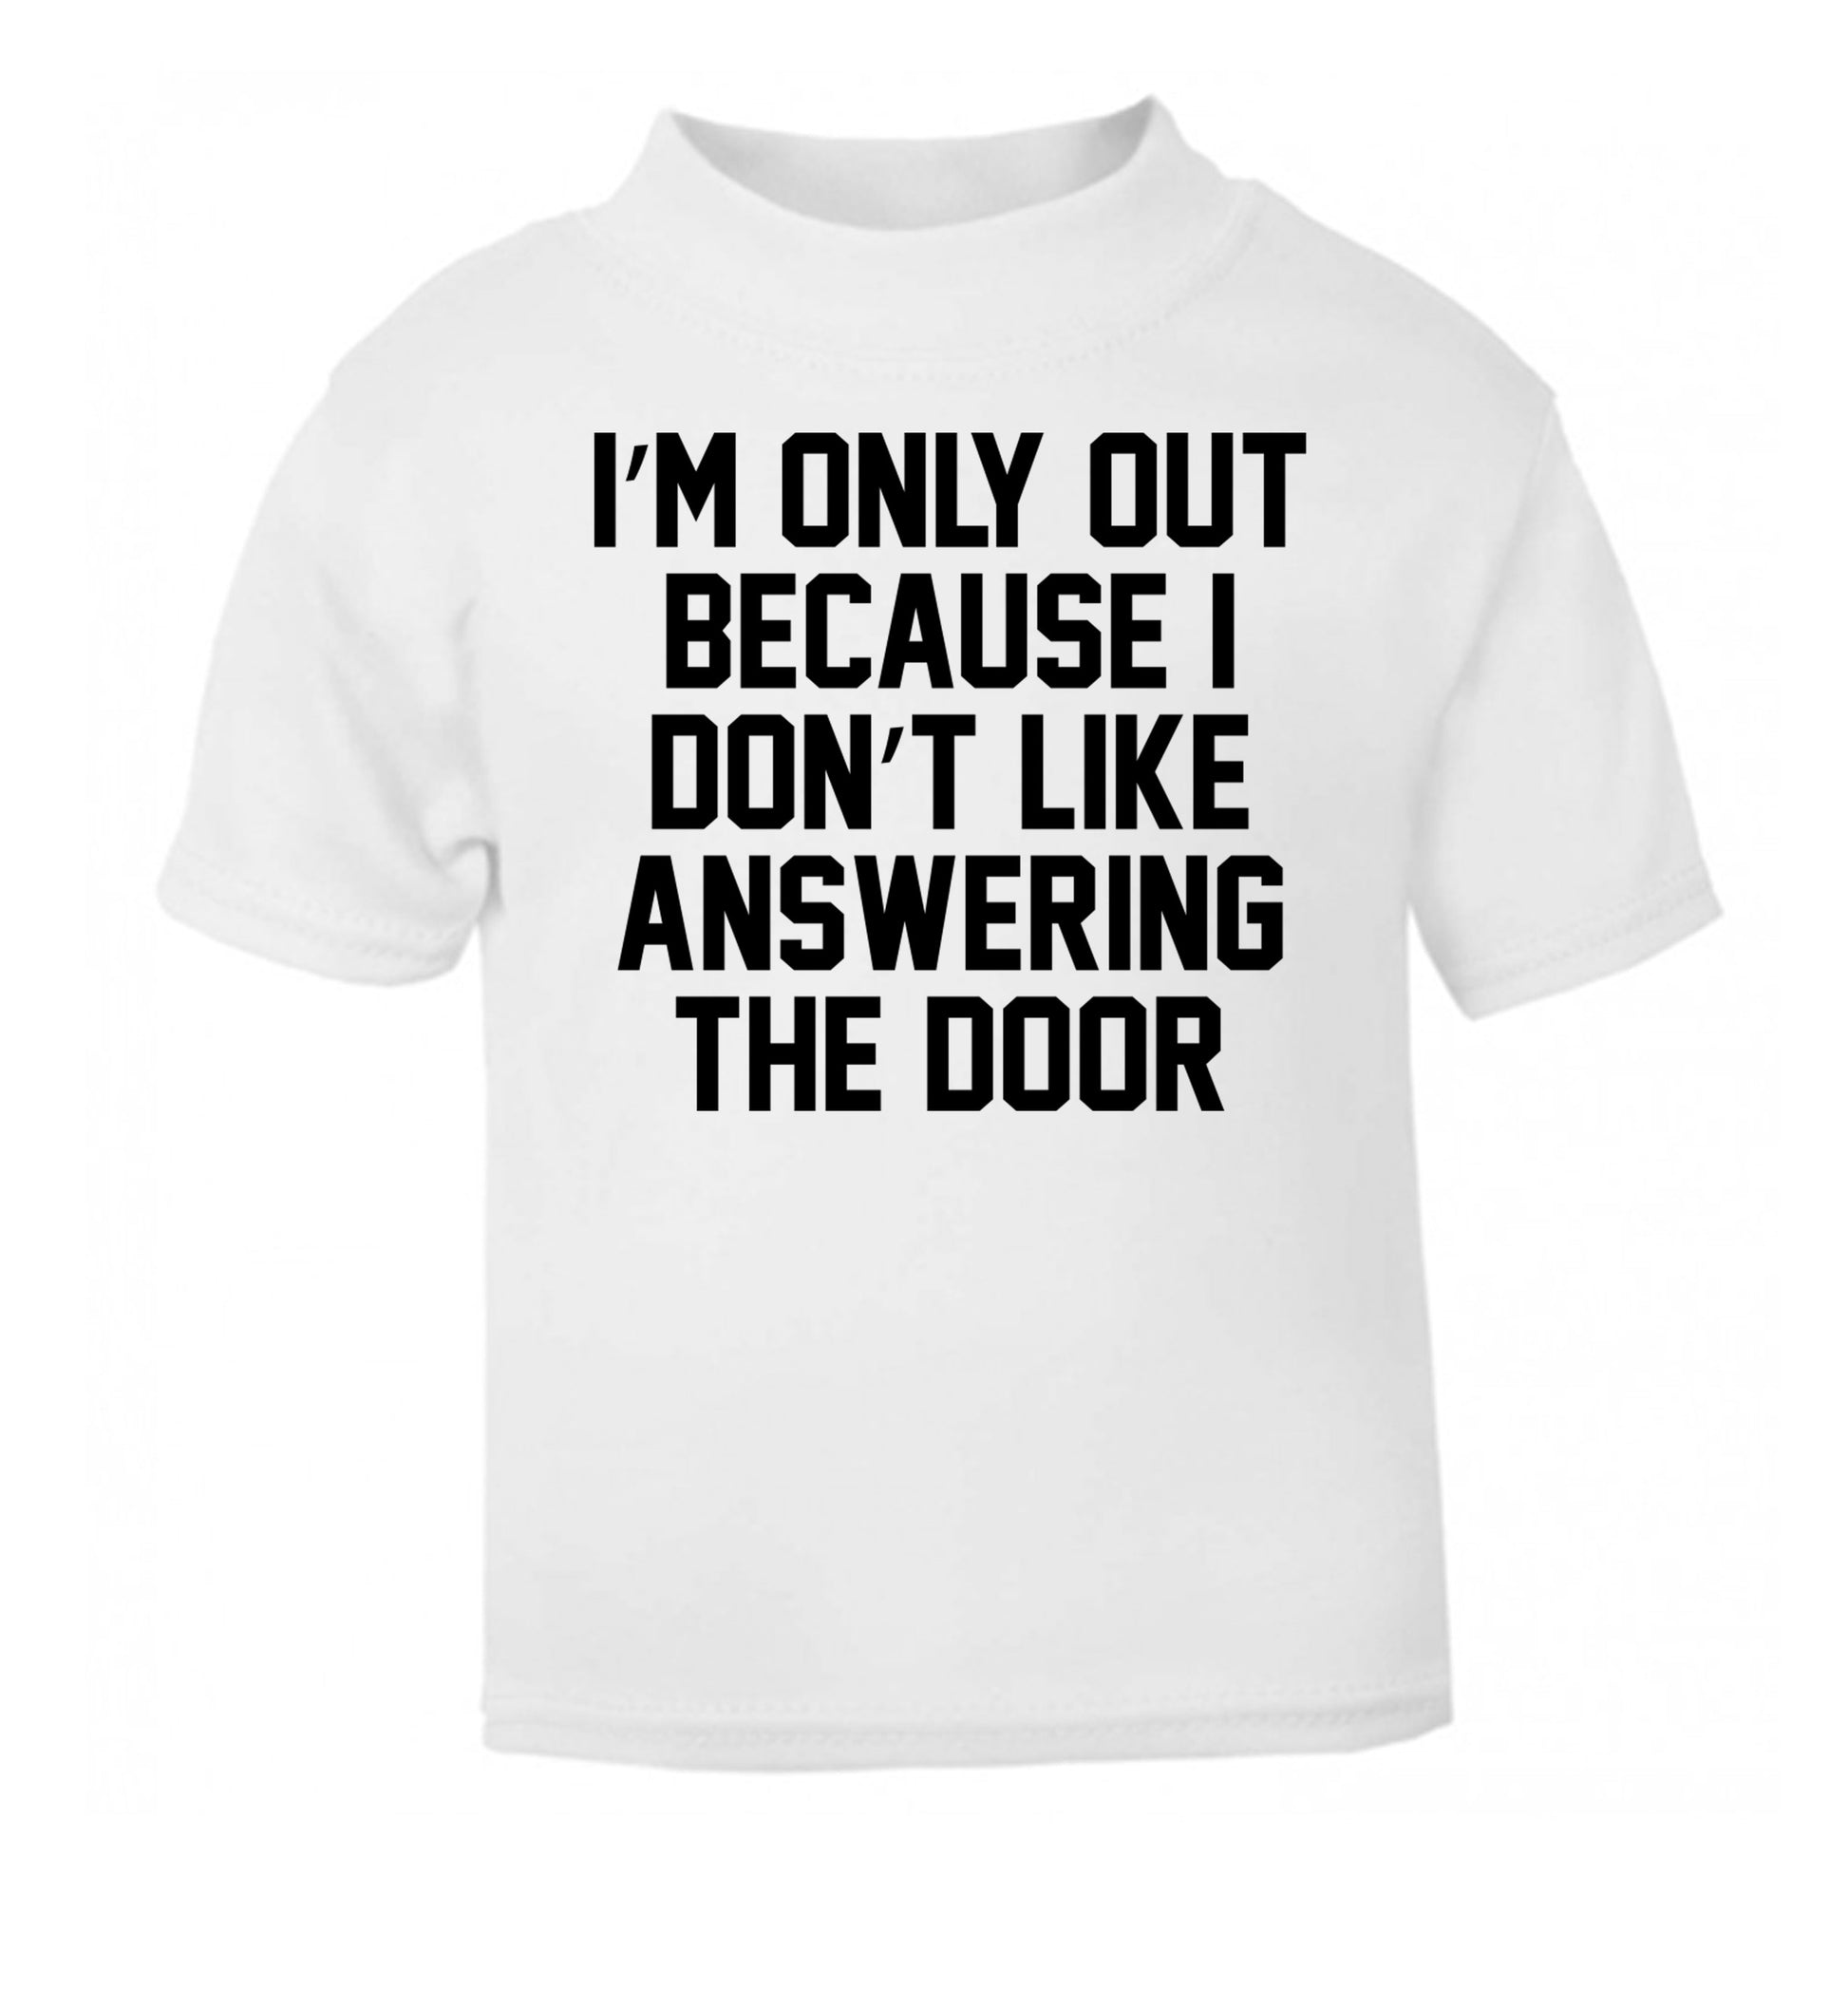 I'm only out because I don't like answering the door white Baby Toddler Tshirt 2 Years